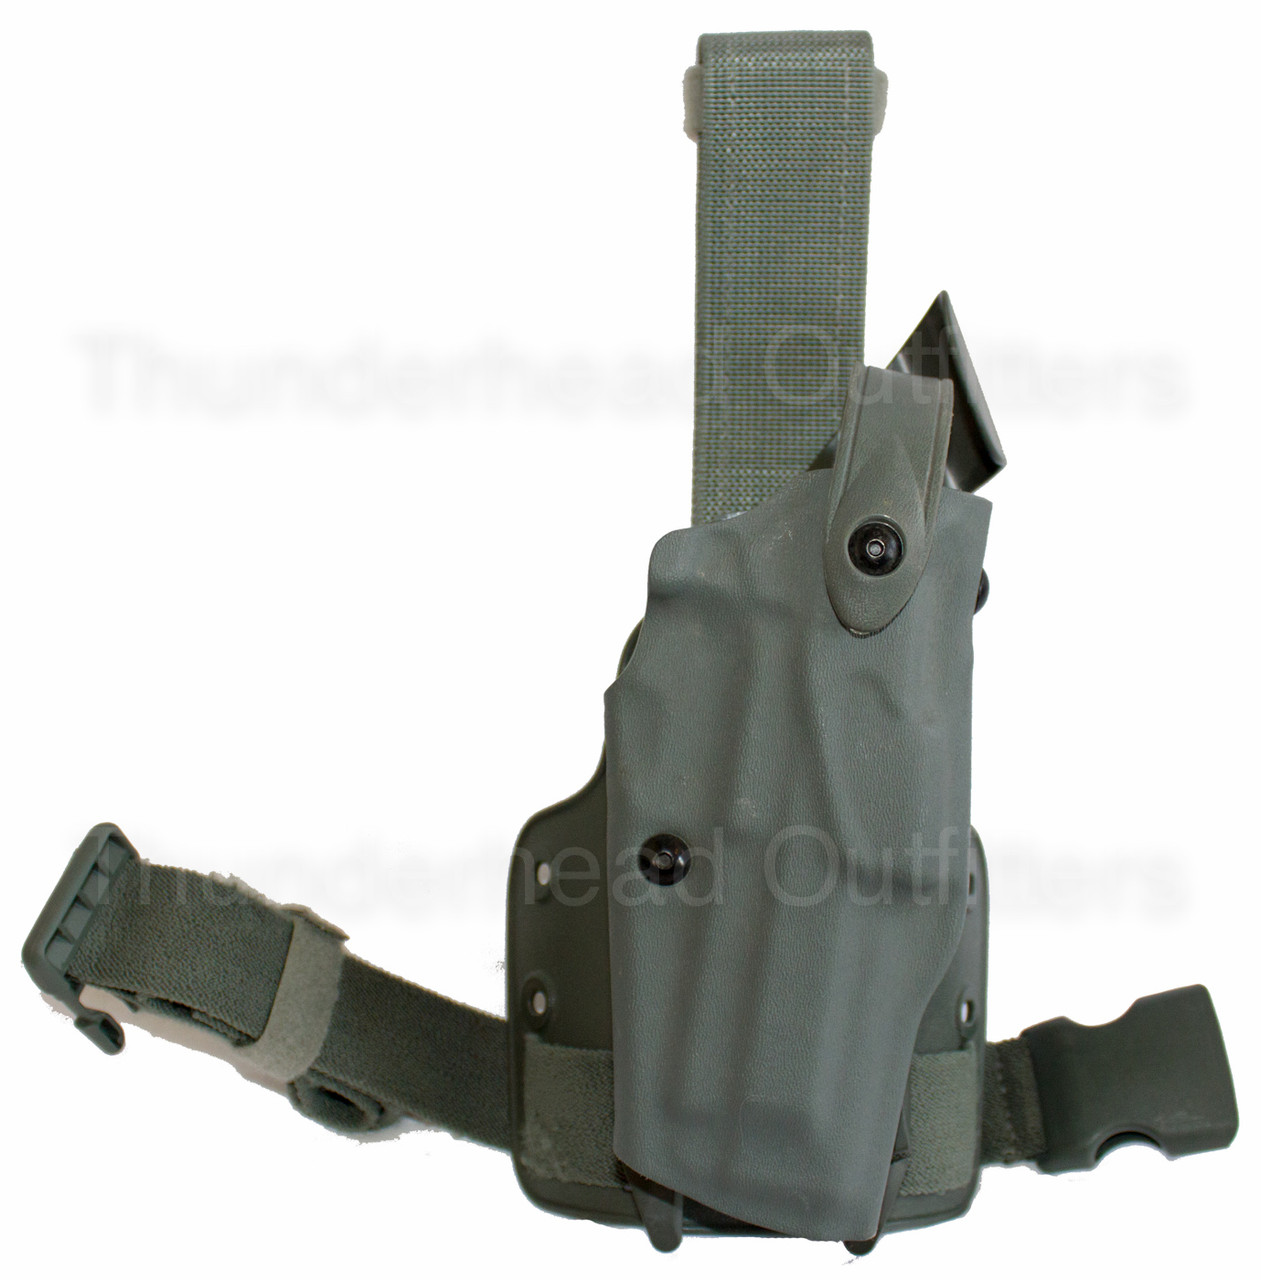 Safariland Drop Leg Holster for Beretta 92 (Coyote) - Thunderhead Outfitters